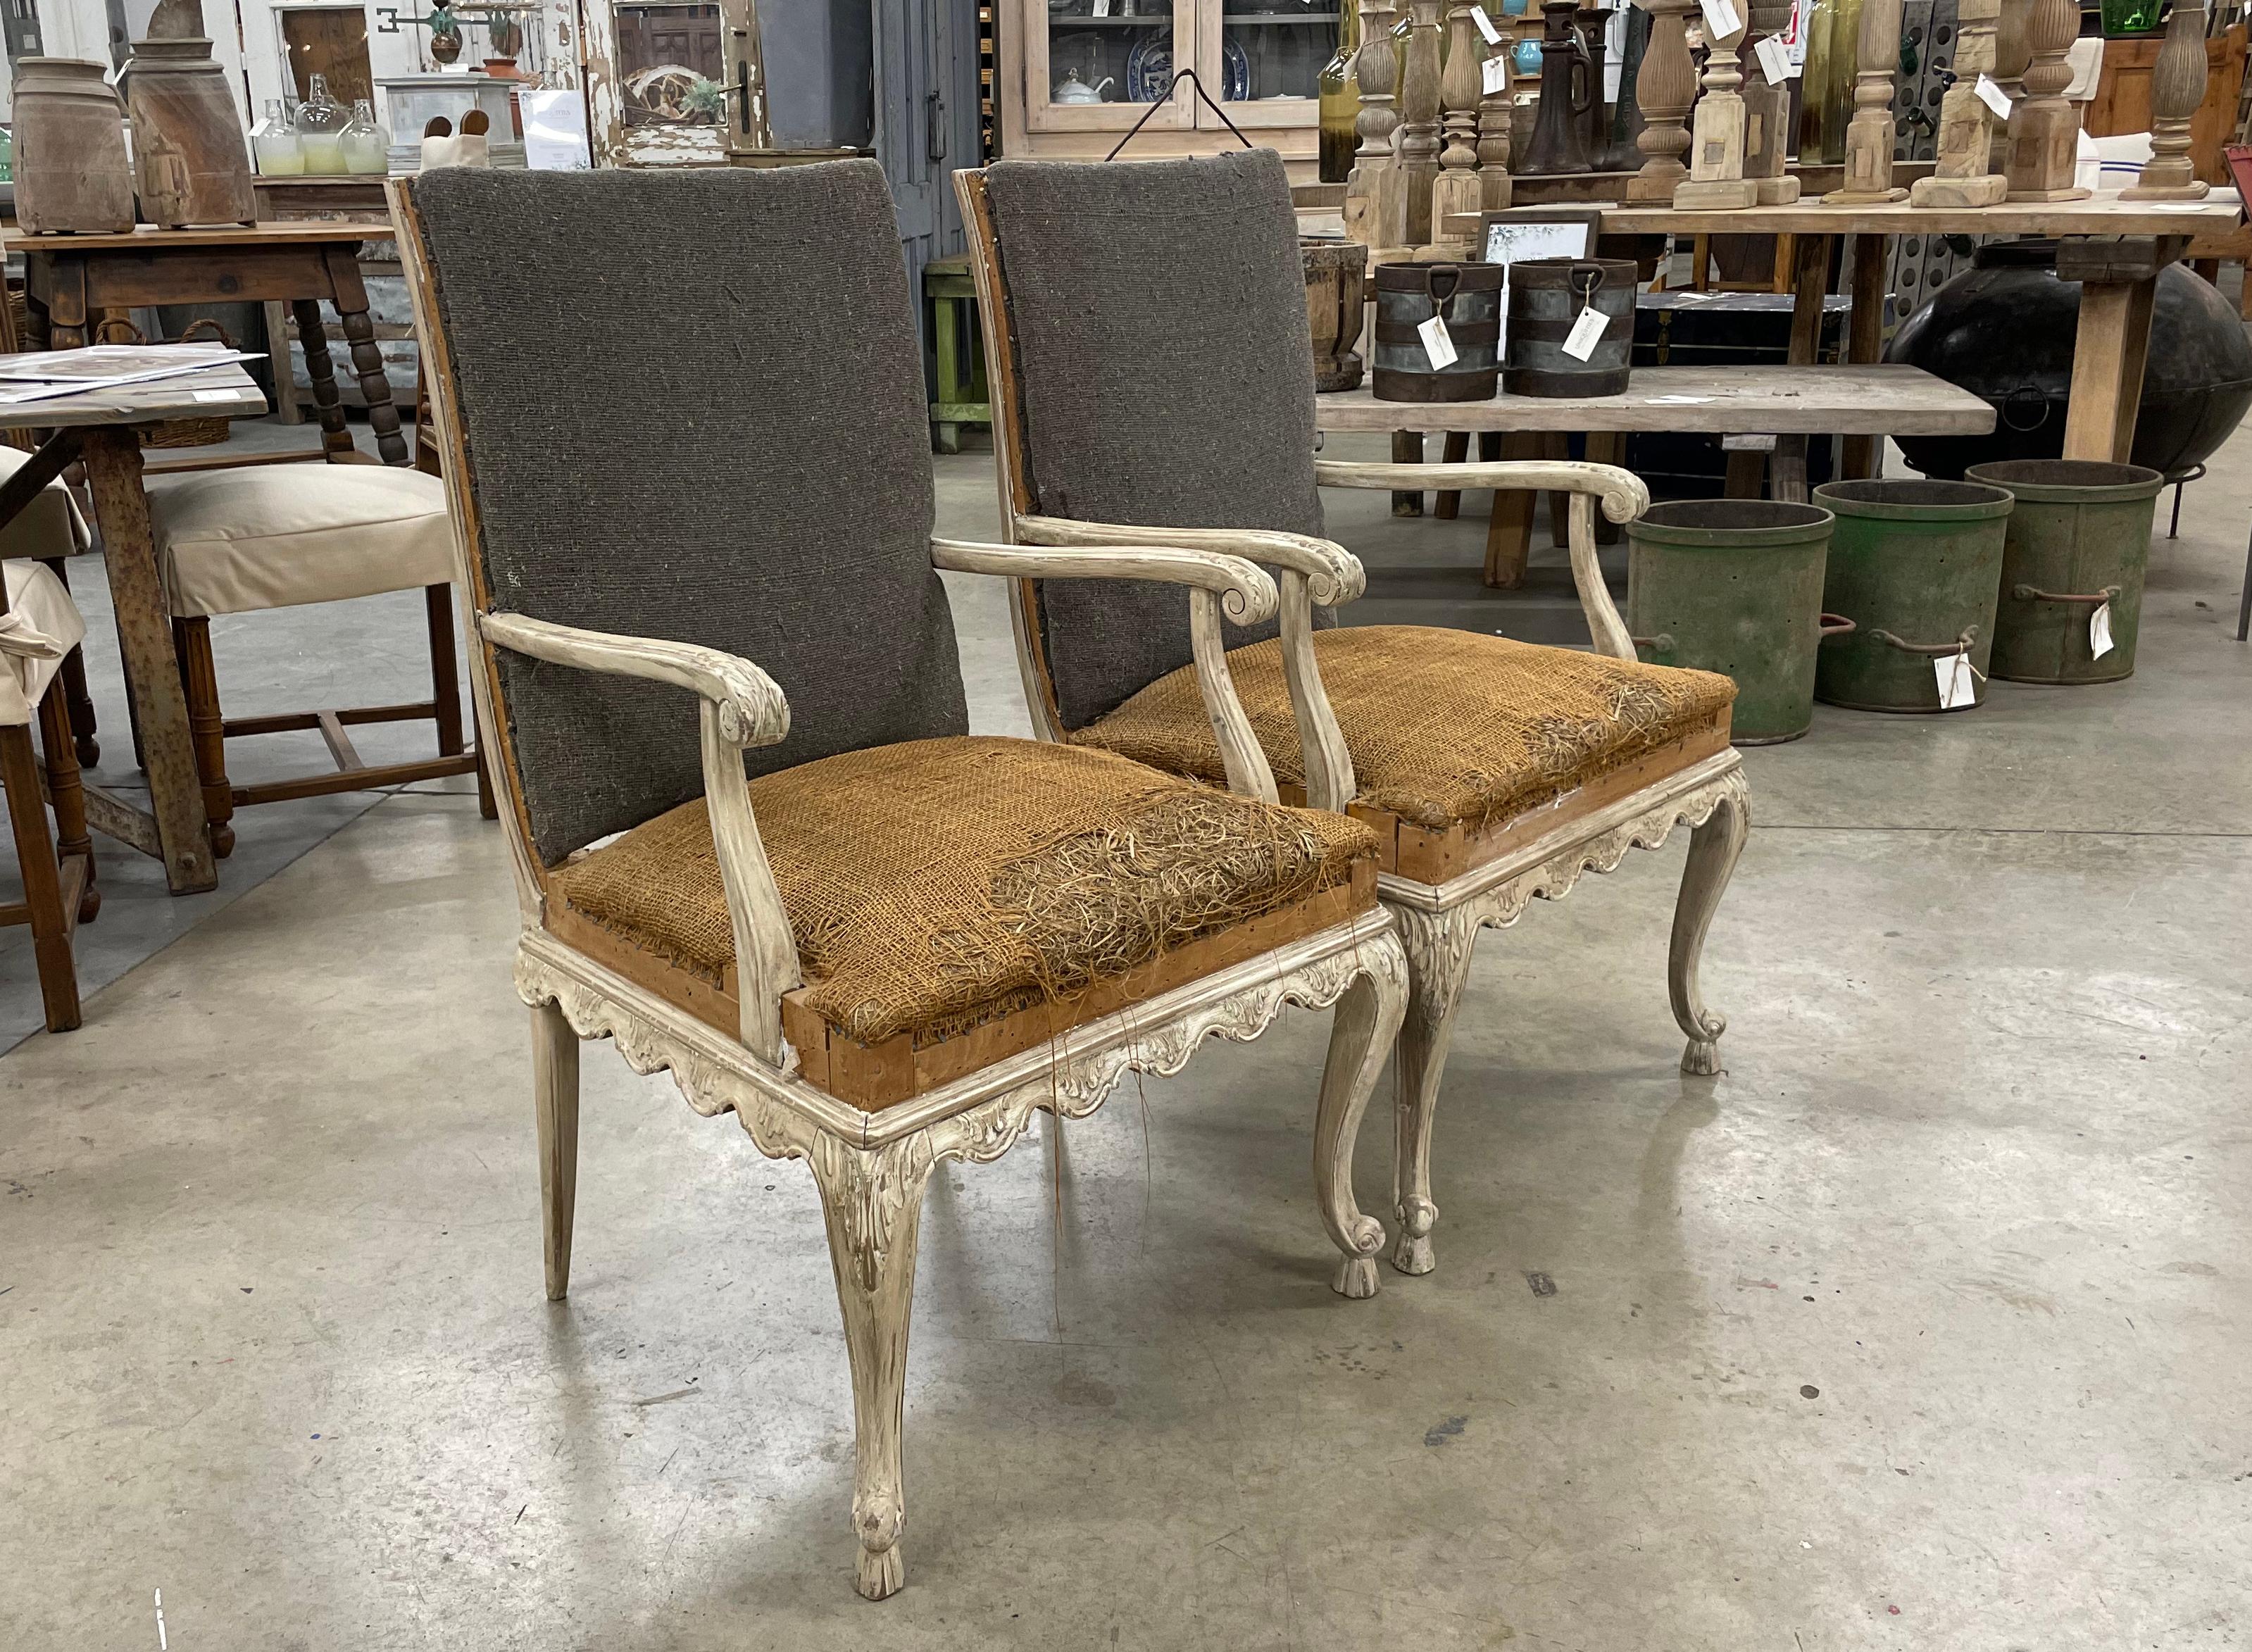 Pair of carved antique Louis XV style fauteuil armchairs. The chairs are very comfortable with a generous size seat and a slight reclined back. 

Beautiful carvings on the both the front cabriole legs and the shaped armrests with acanthus leaf